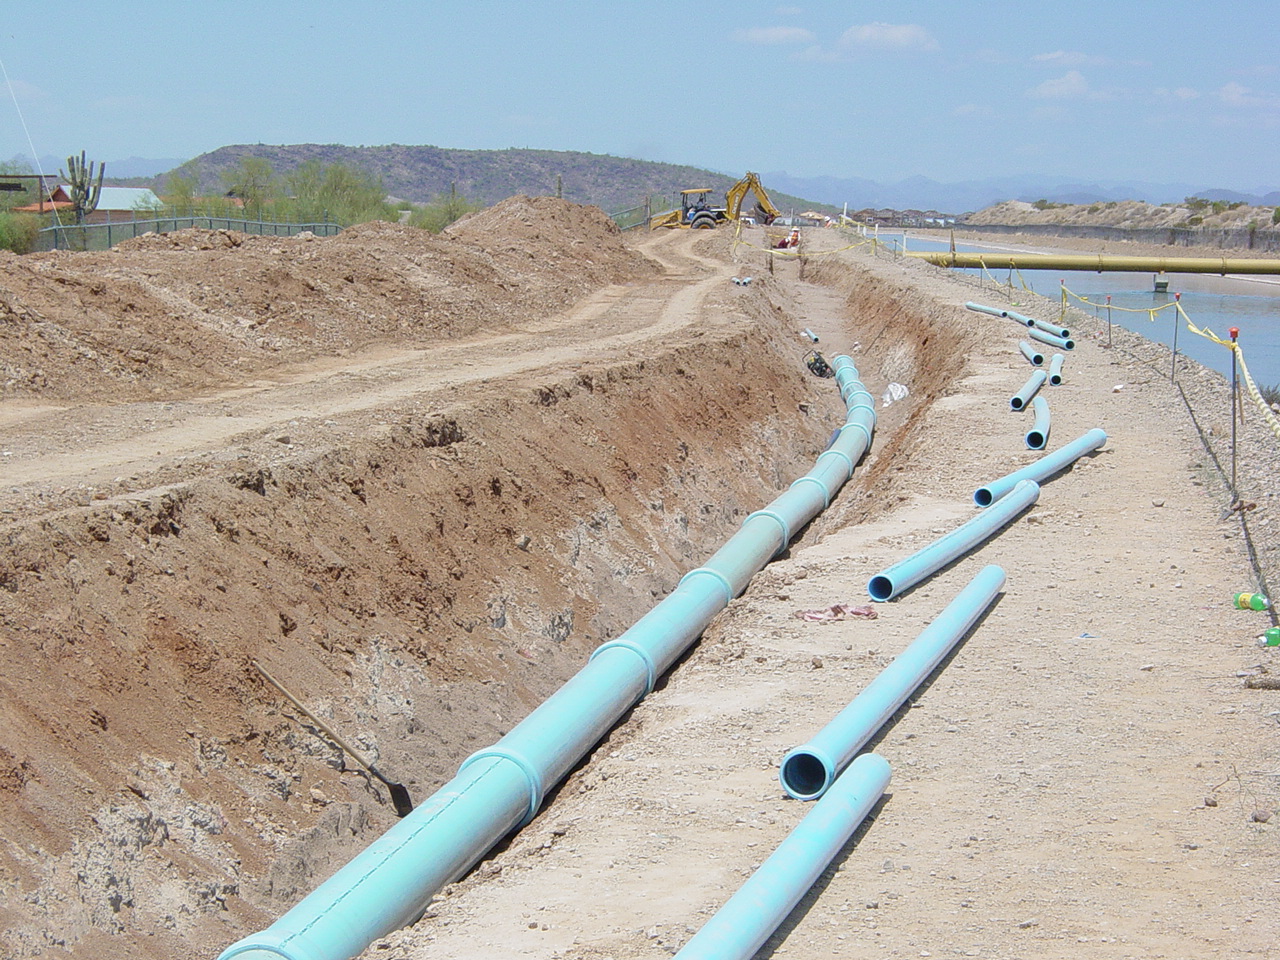 A construction site in Phoenix, AZ with large blue pipes laid out along a dug trench for the CAP Dual Waterlines project, featuring excavation machinery and hills in the background.